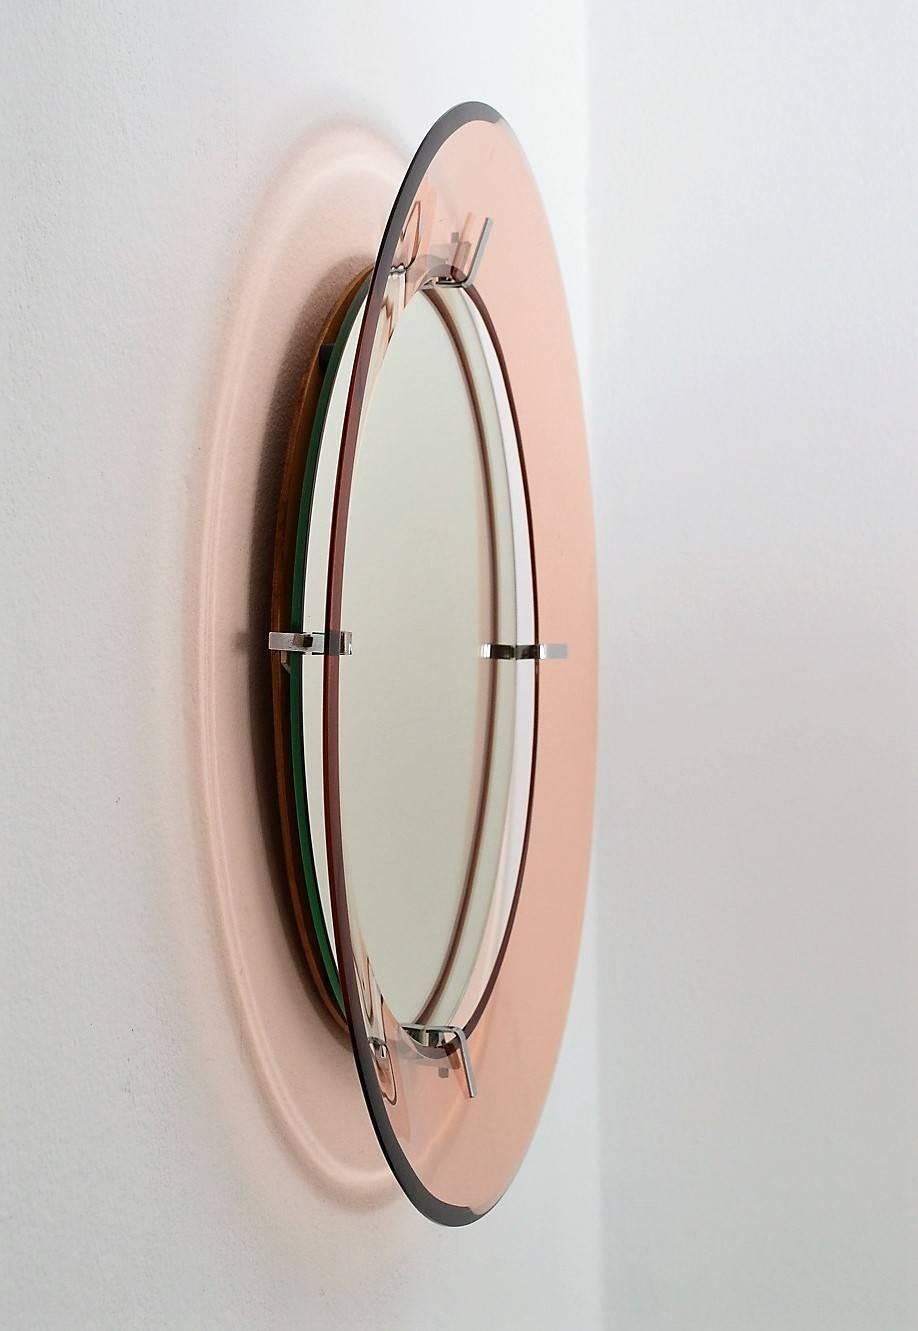 Beautiful round wall mirror with light pink (rose) glass frame, hold with chrome-plated holders.
The mirror is typical for Italian manufacturing from the 1970s by Cristal Arte.
Very feminine and elegant.
The diameter of the mirrored glass itself